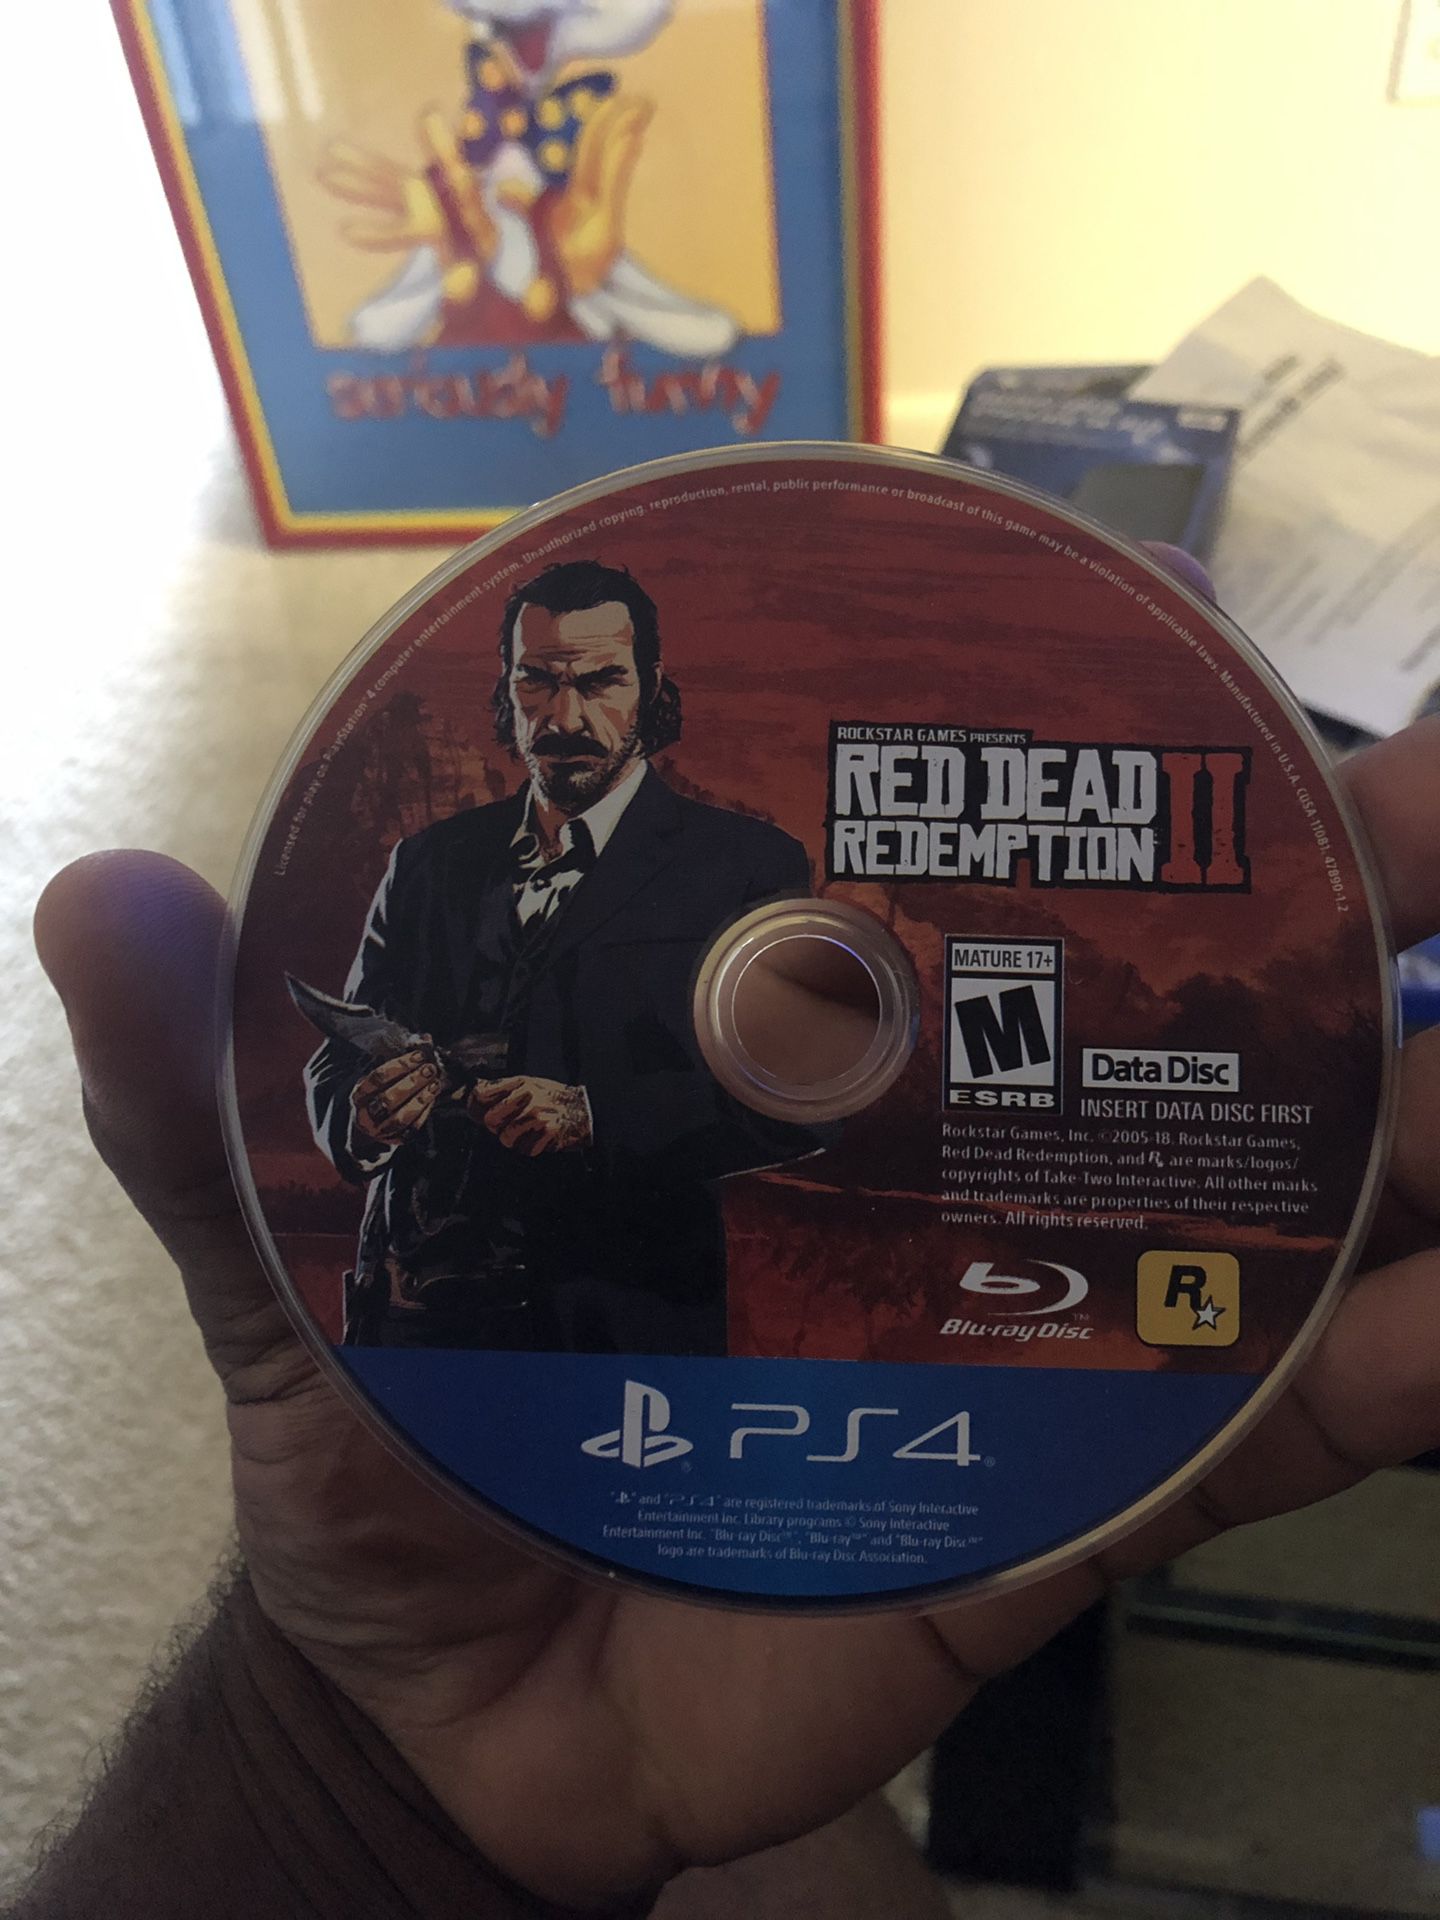 RED DEAD 2